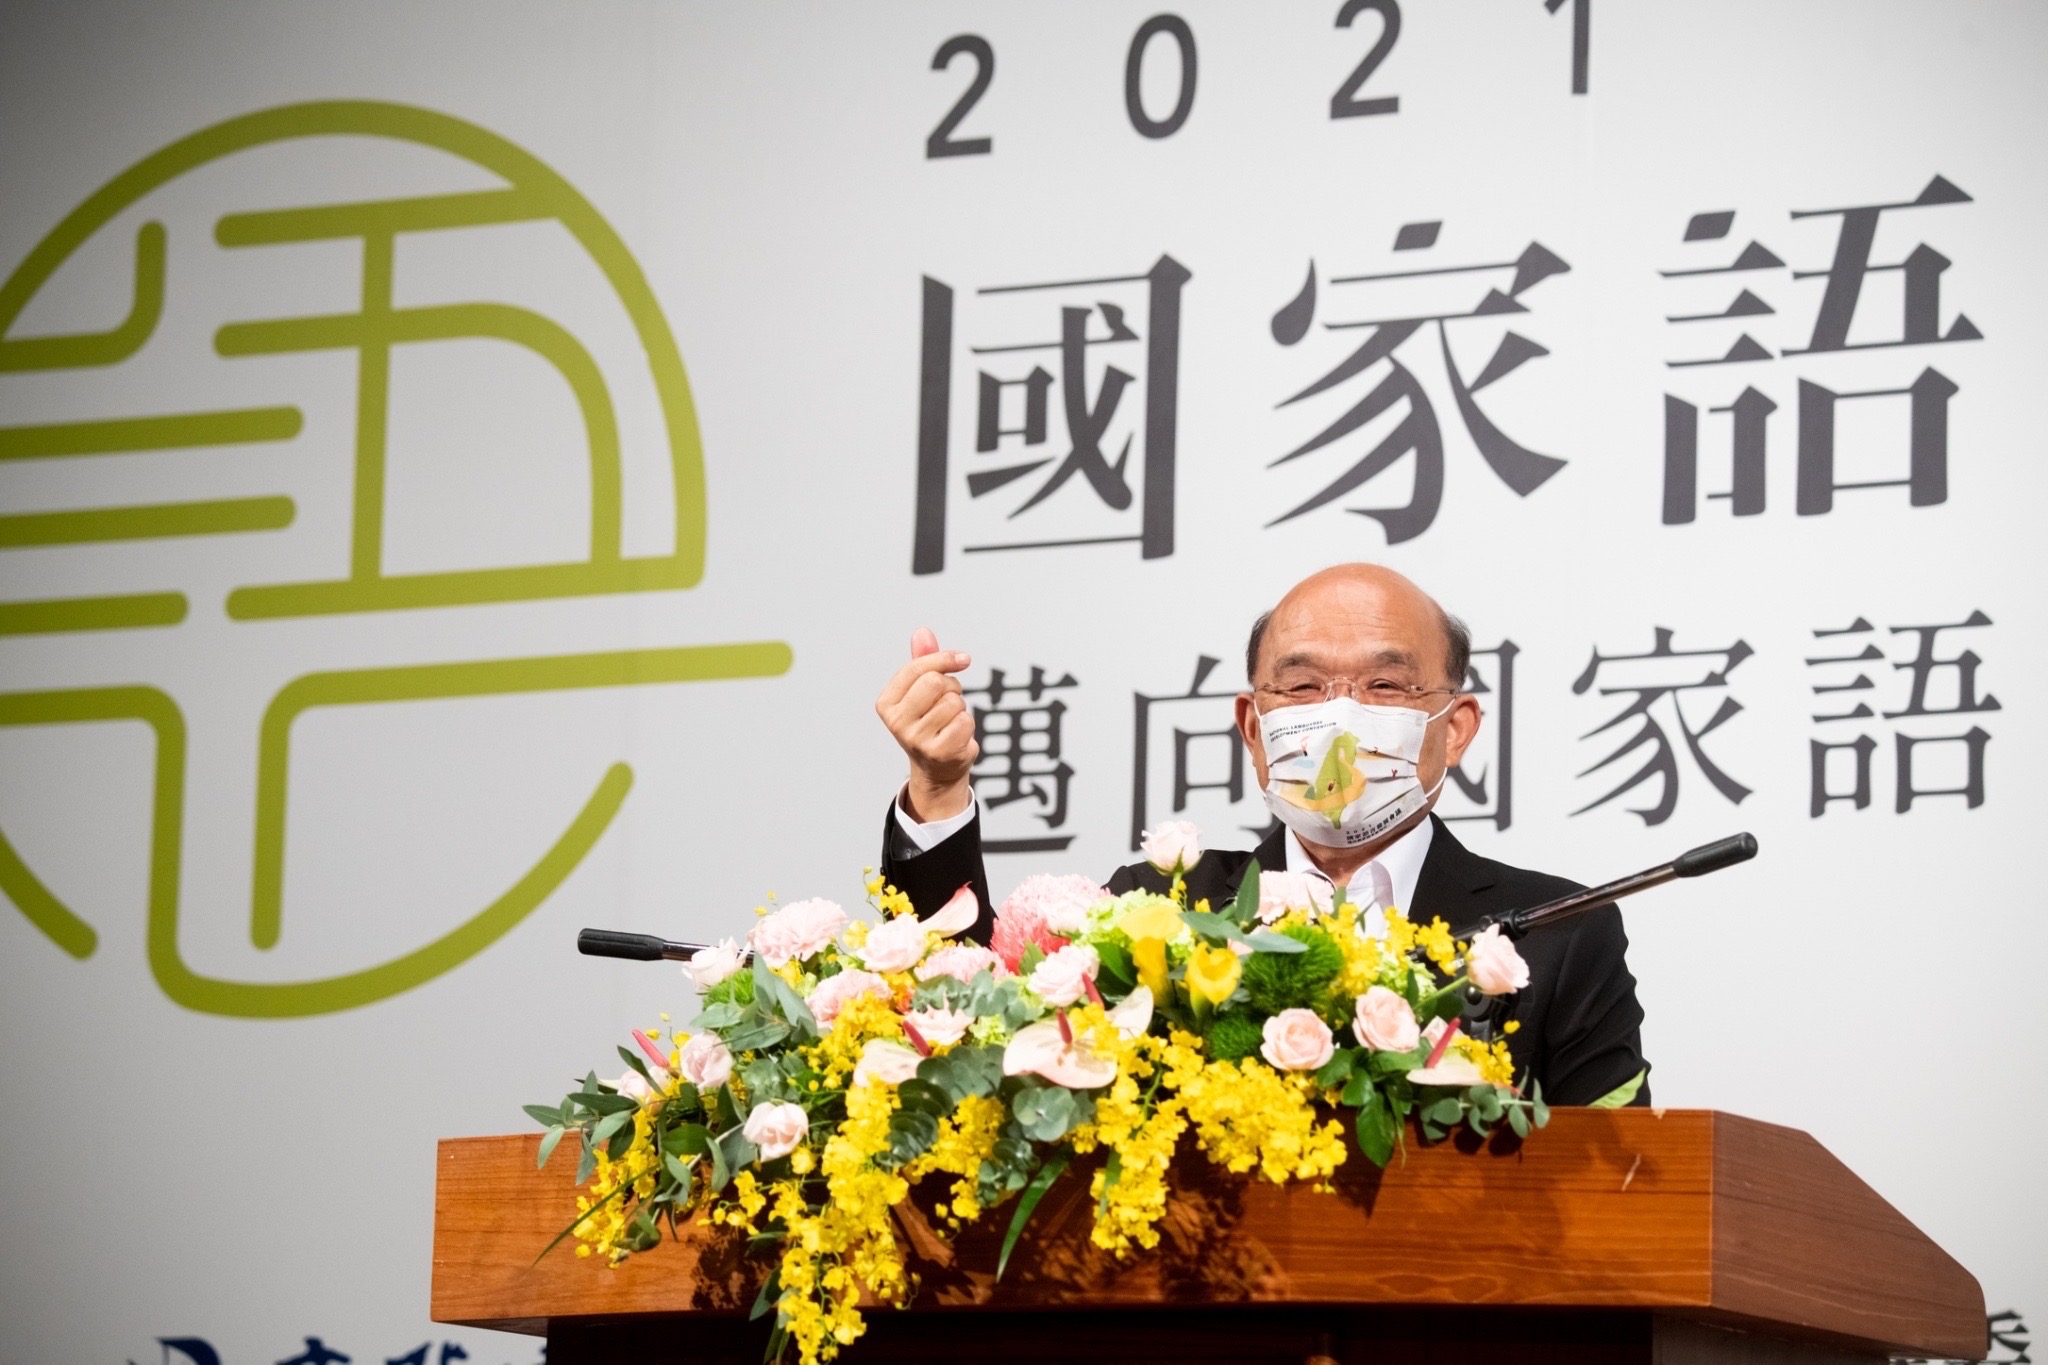 Premier Su Tseng-chang attends the National Languages Development Convention 2021, promoting equal respect for Taiwan’s various mother tongues.